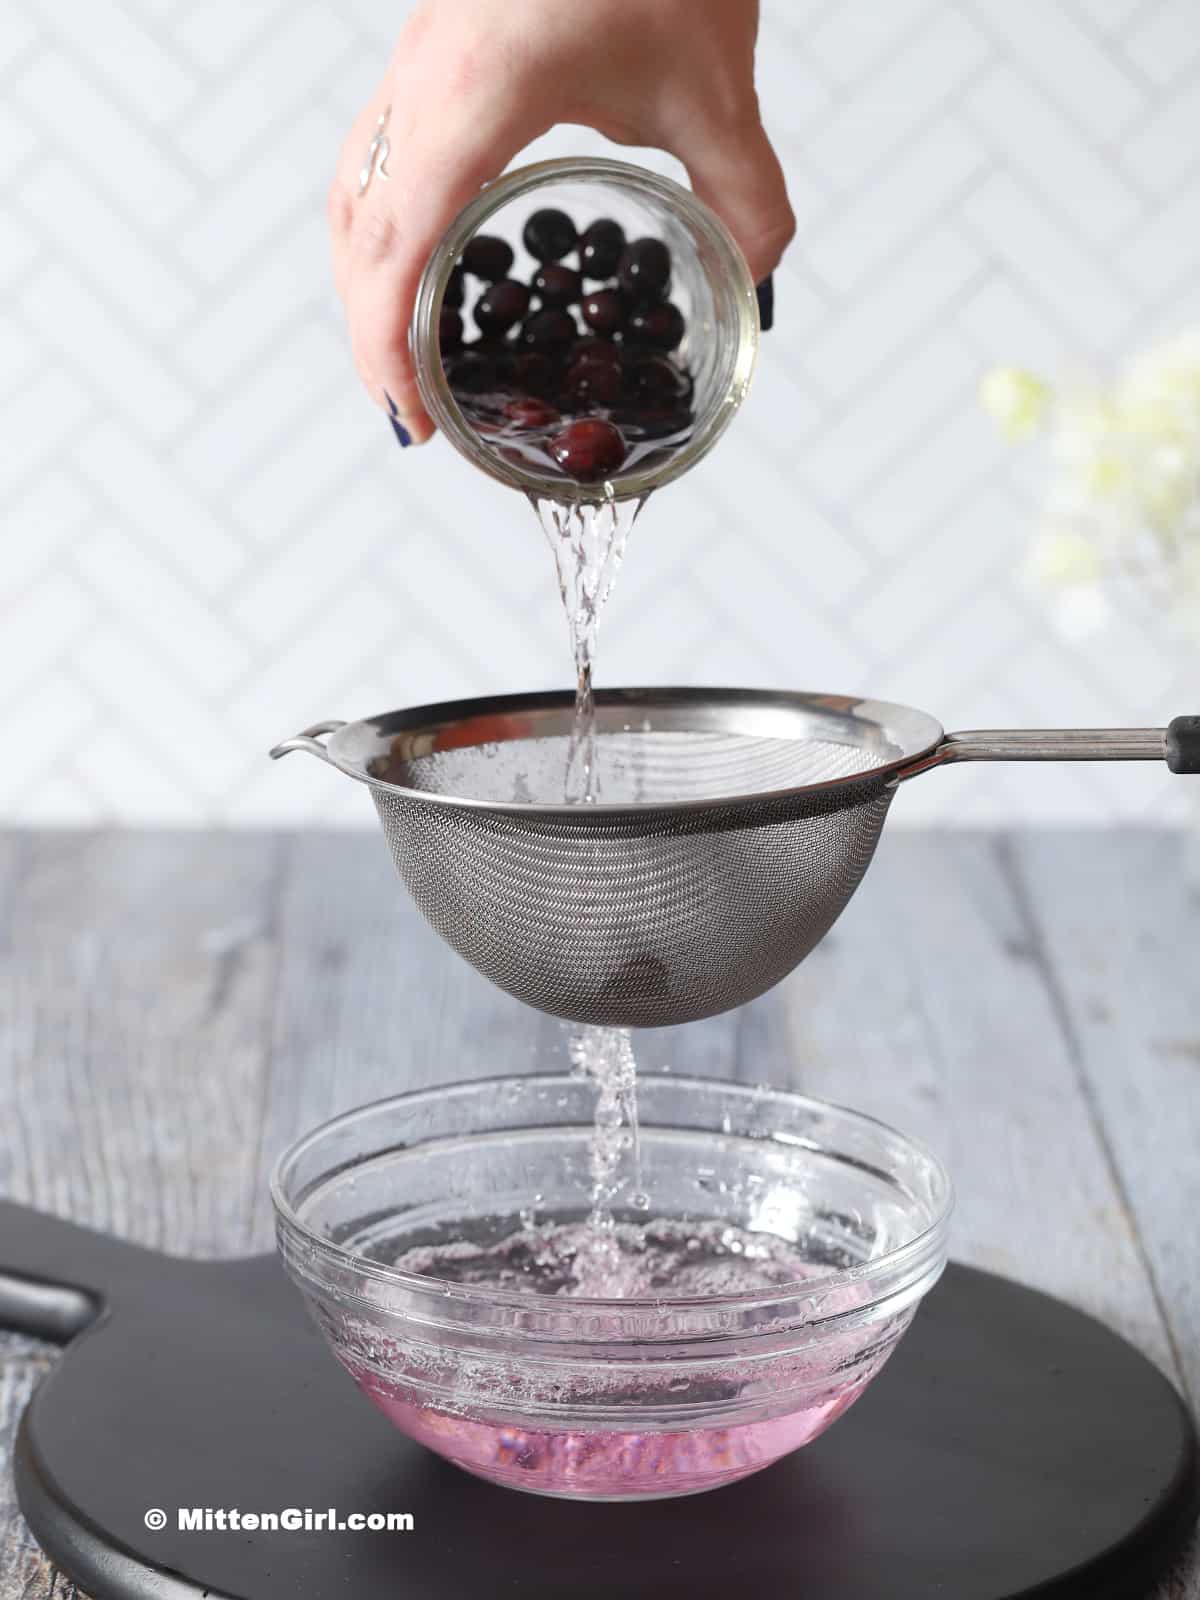 Blueberries and vodka being poured through a strainer into a bowl below.